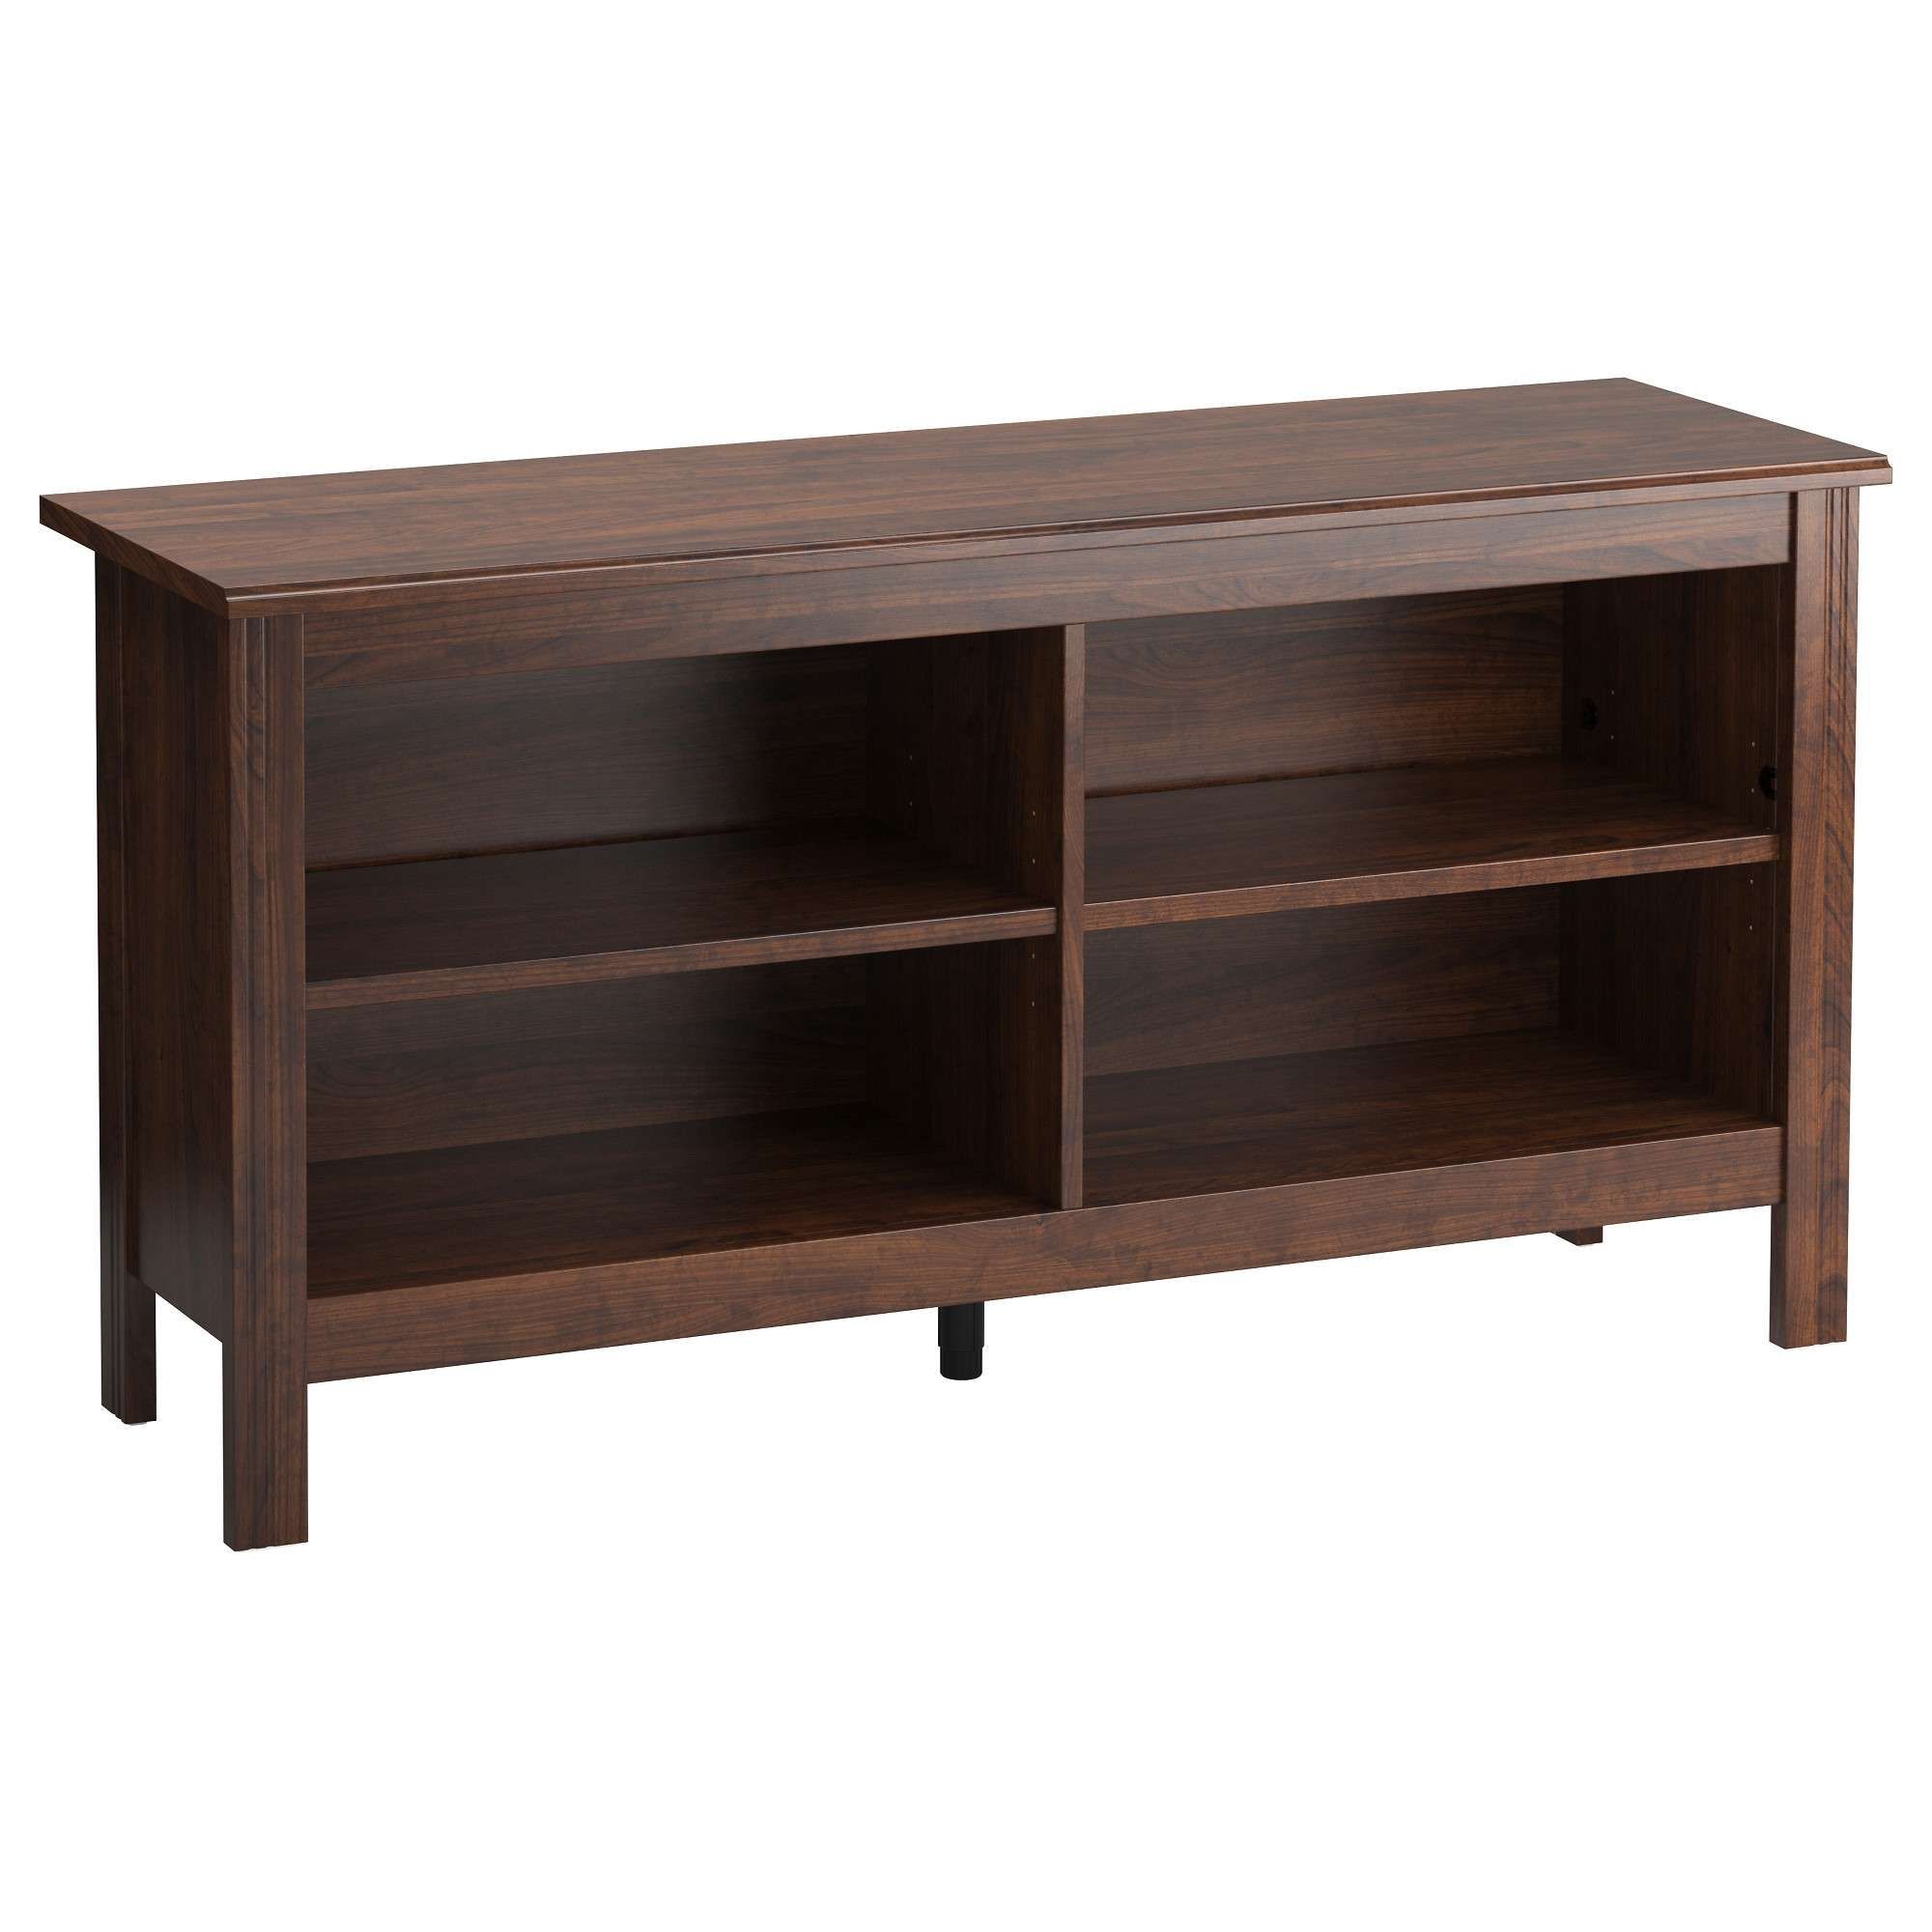 Brusali Tv Bench – Brown – Ikea Throughout Brown Tv Stands (Gallery 6 of 20)